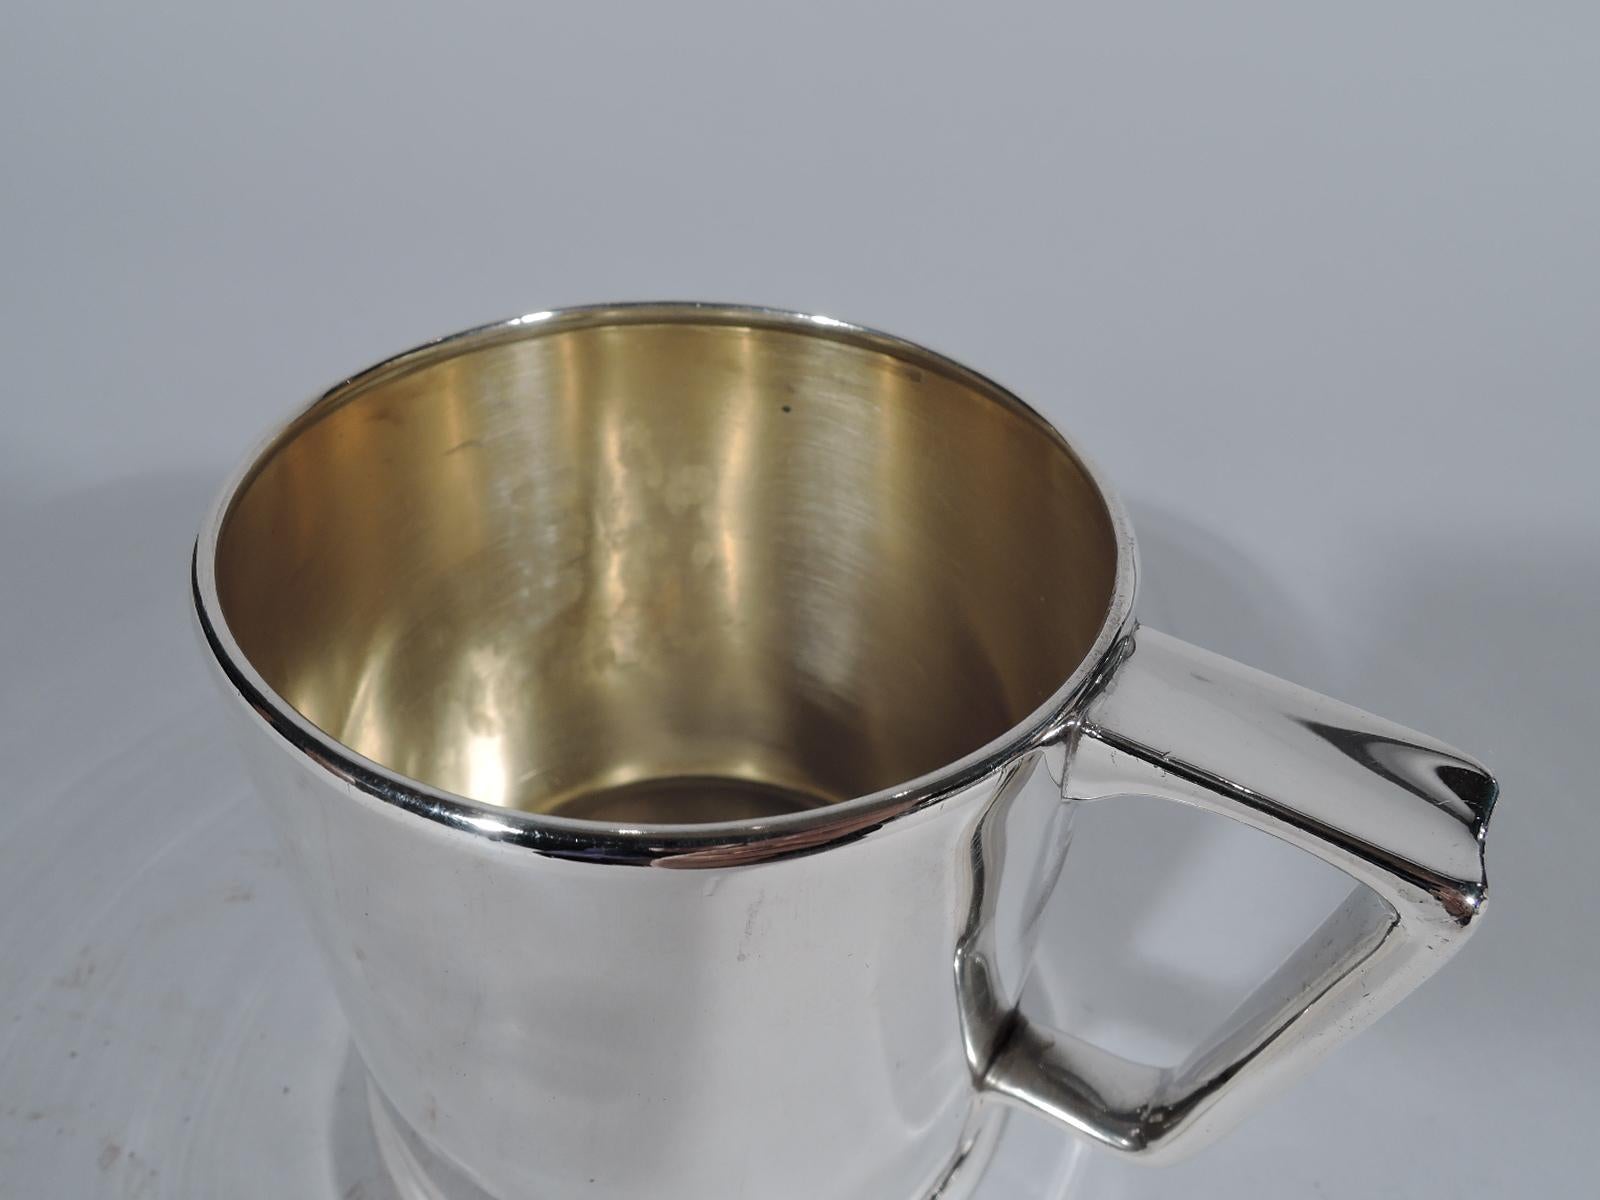 Spare and elegant sterling silver baby cup. Made by Tiffany & Co. in New York, circa 1907. Drum form with bracket handle and skirted foot. Interior gilt washed. Nice heft with lots of room for engraving. Fully marked including pattern no. 17093